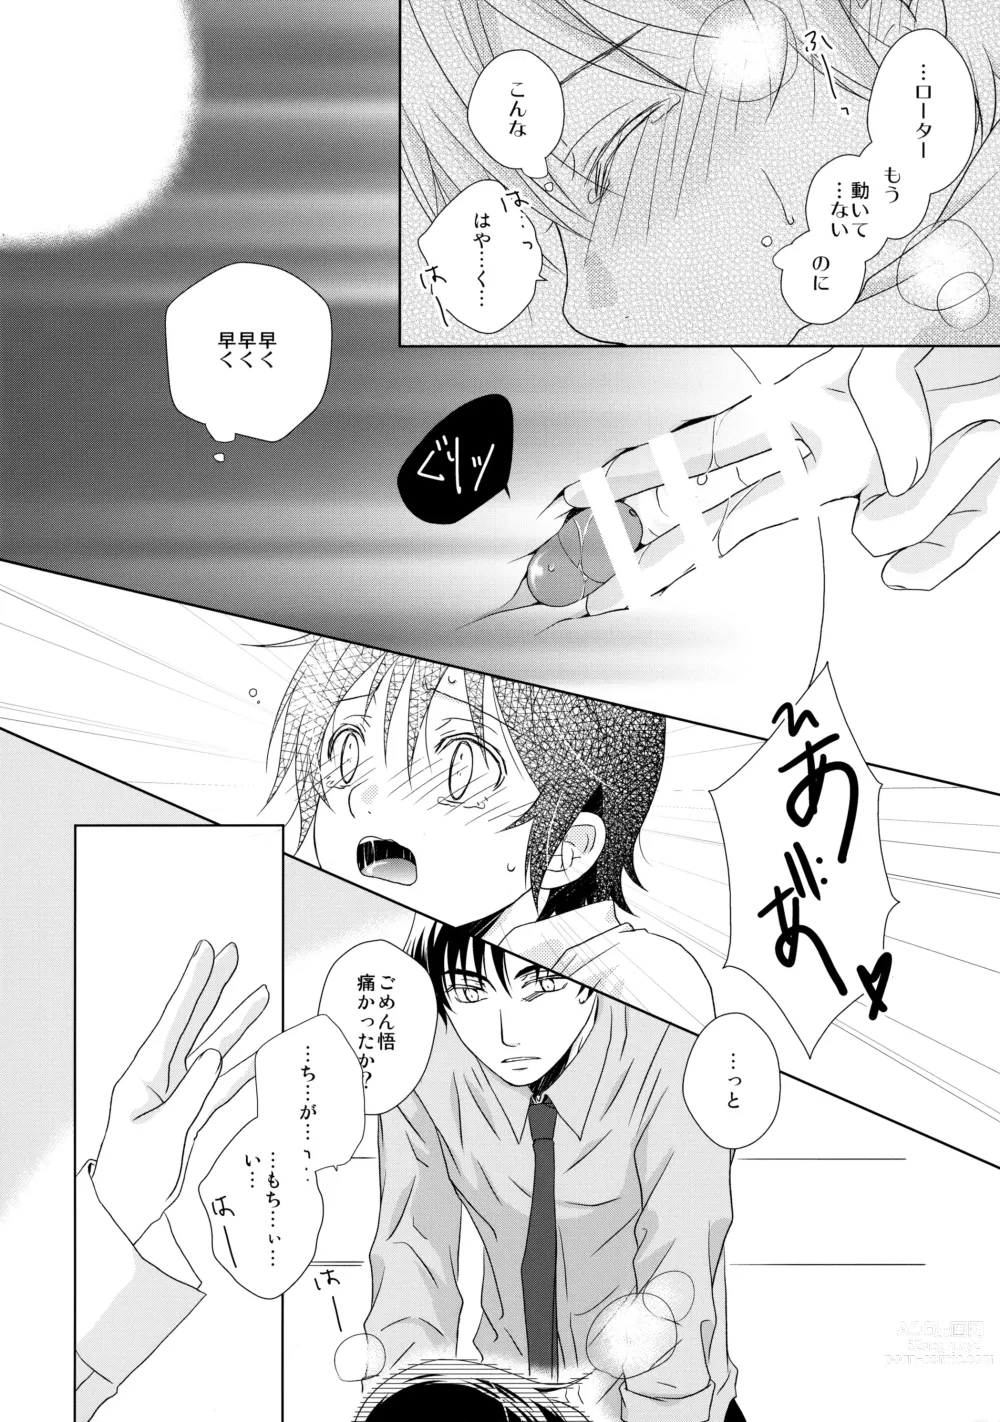 Page 9 of doujinshi Butterfield 8